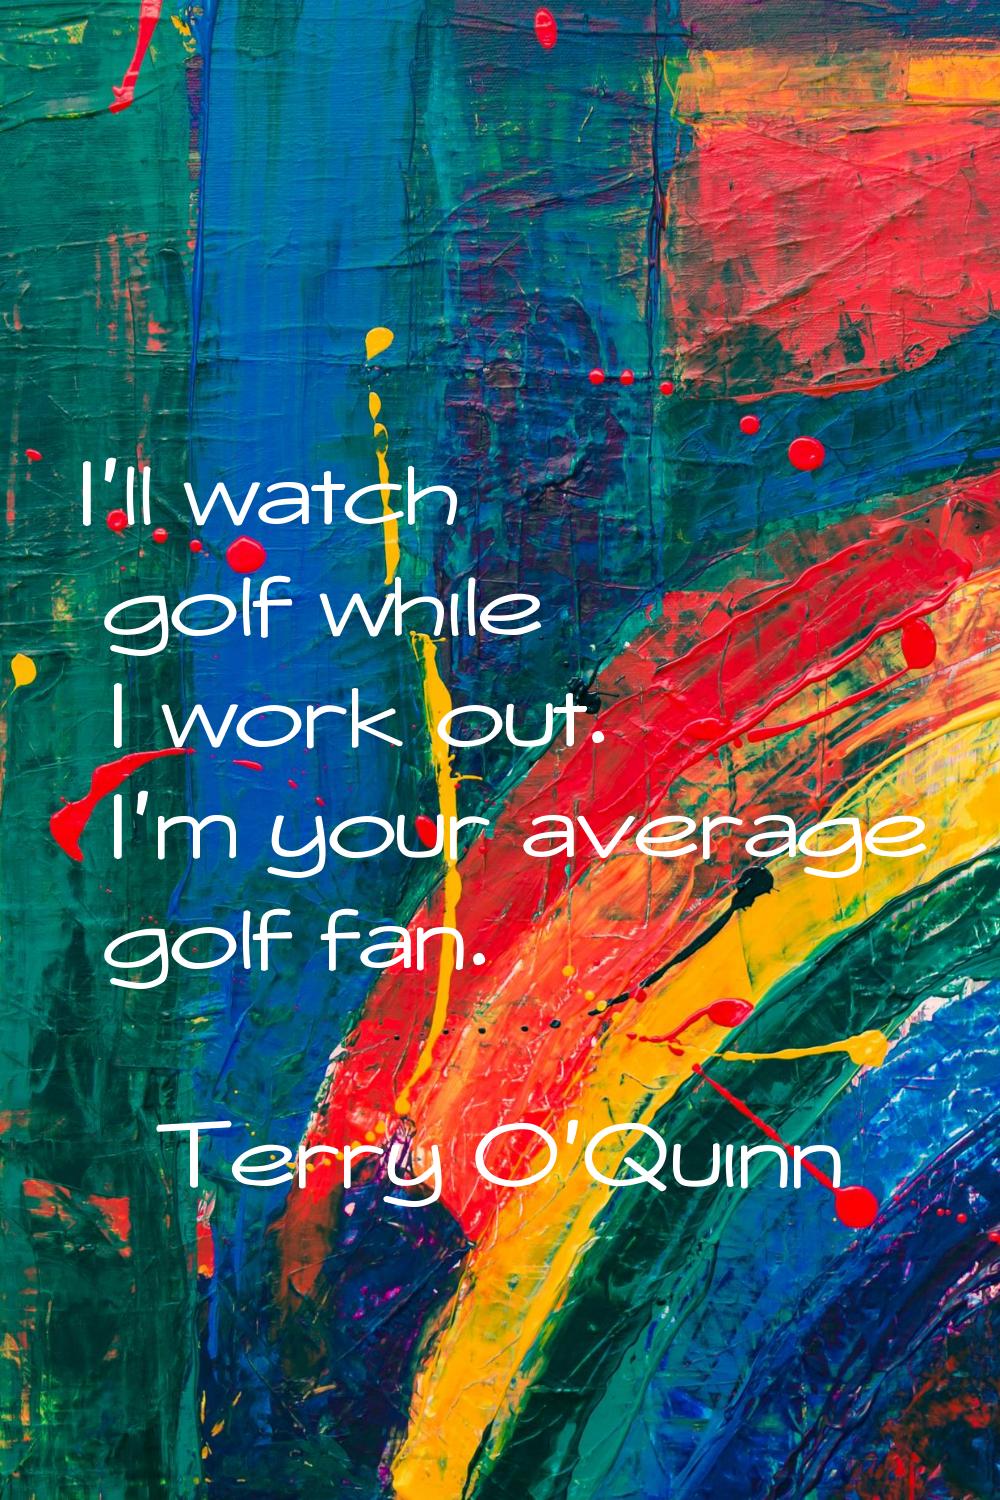 I'll watch golf while I work out. I'm your average golf fan.